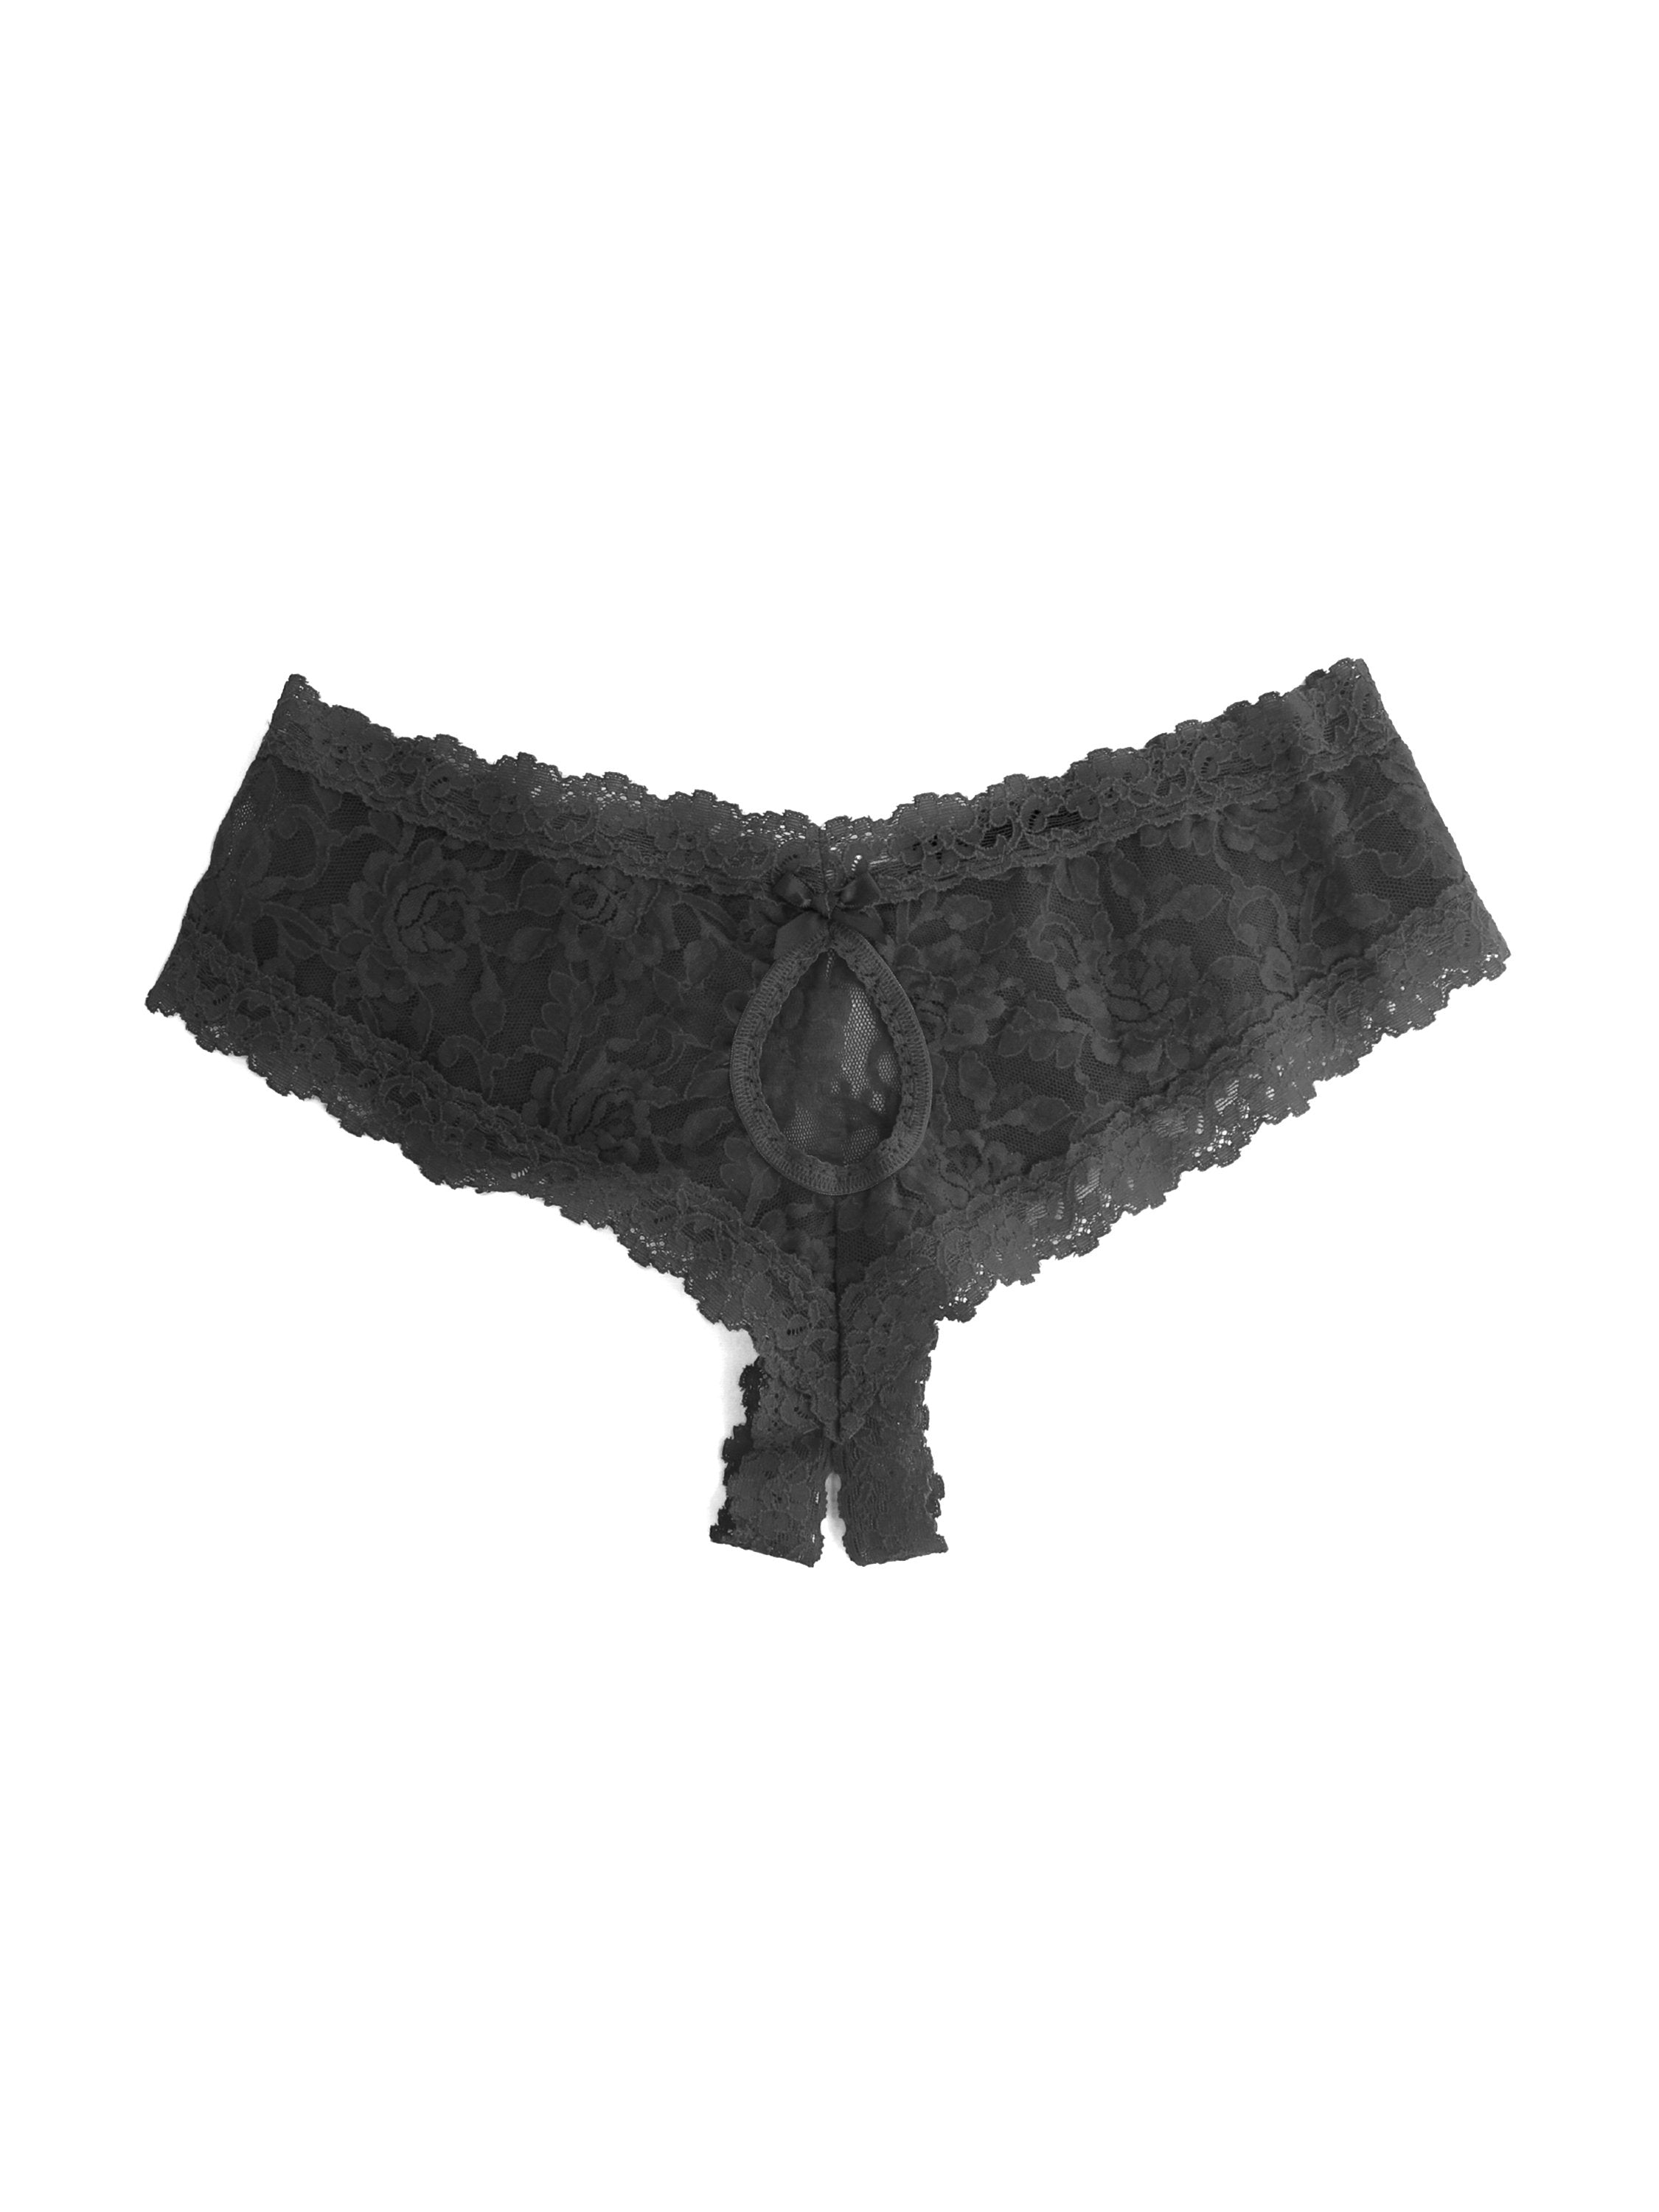 Wide Elastic,black Lace,handmade,bubble Fabric,crotchless Panties